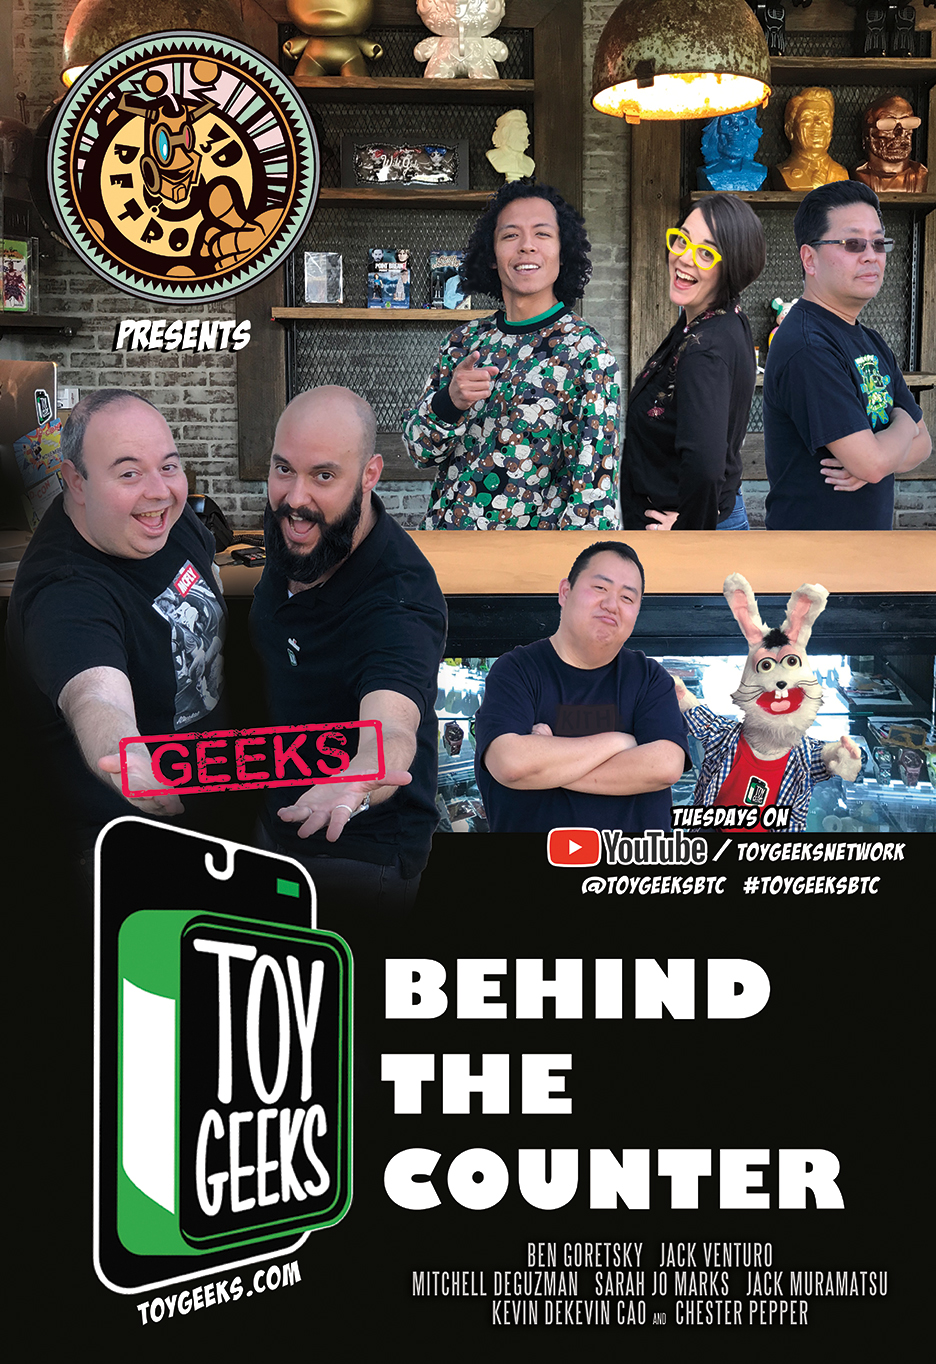 Toy Geeks: Behind the Counter